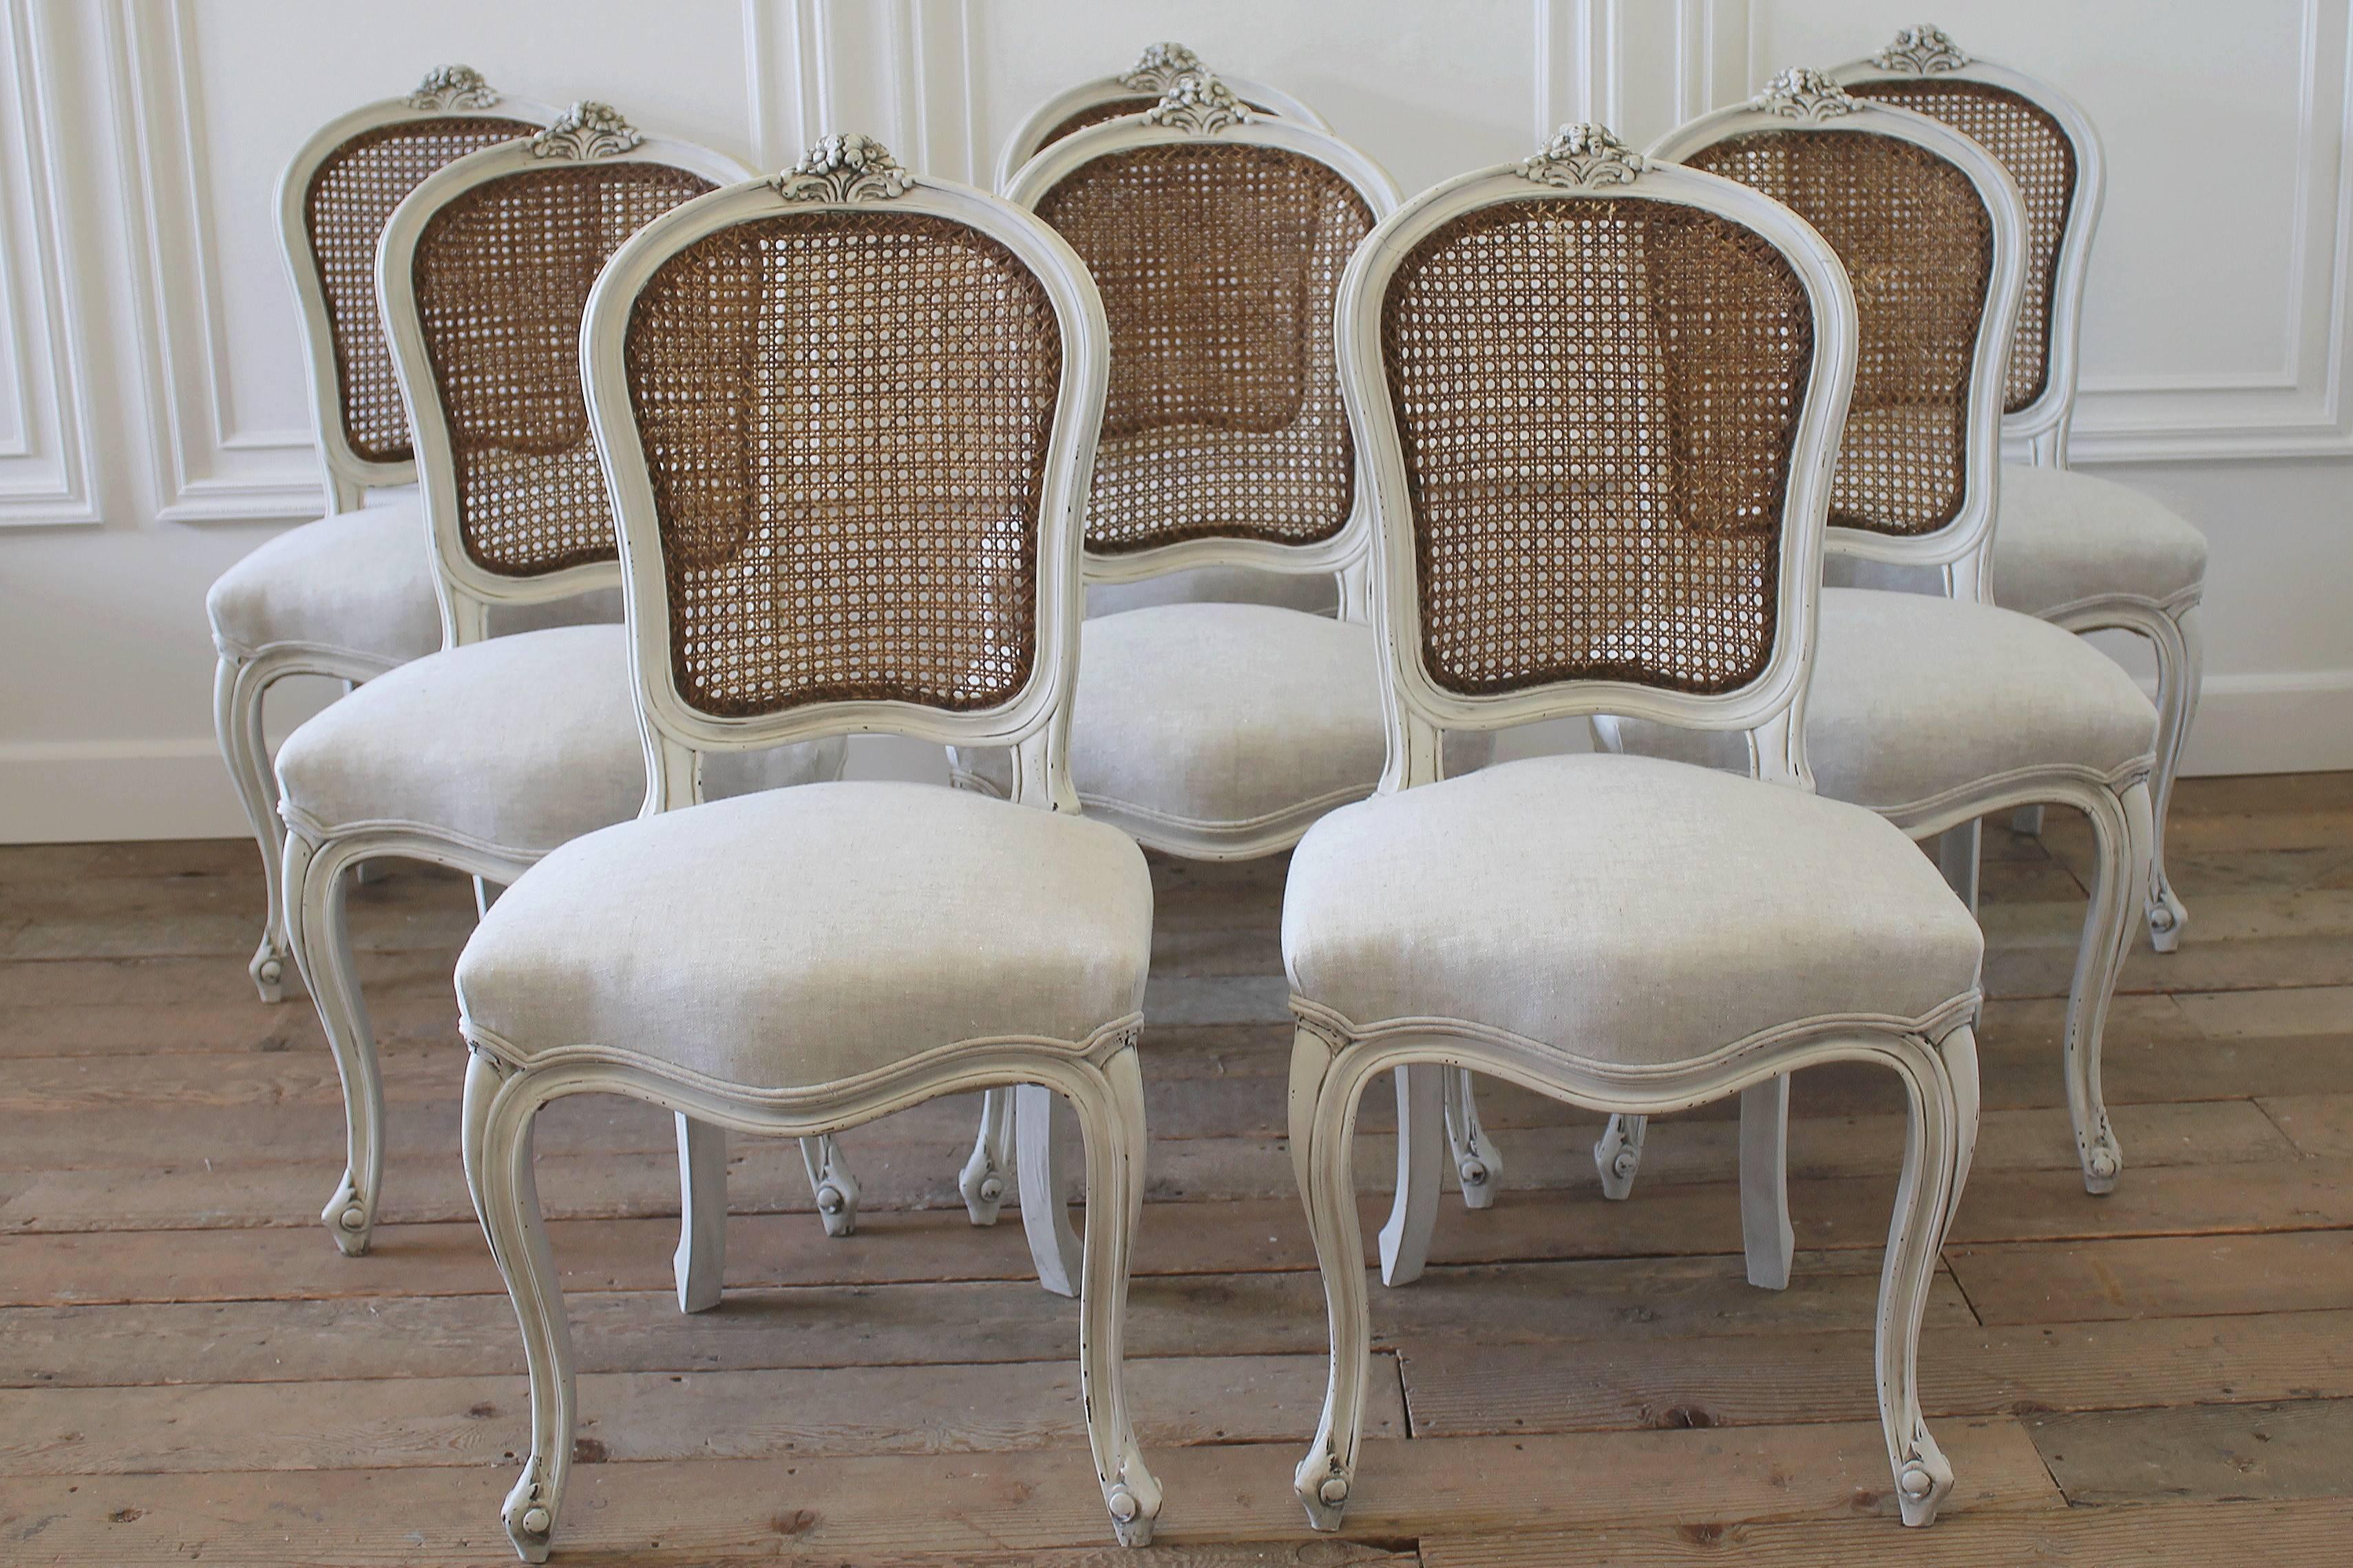 Beautiful set of dining chairs that have been painted in our signature oyster white, with an antique glazed finish. The cane backs have been left in their natural patina, and are in good condition with no breaks or holes.
The seats have been